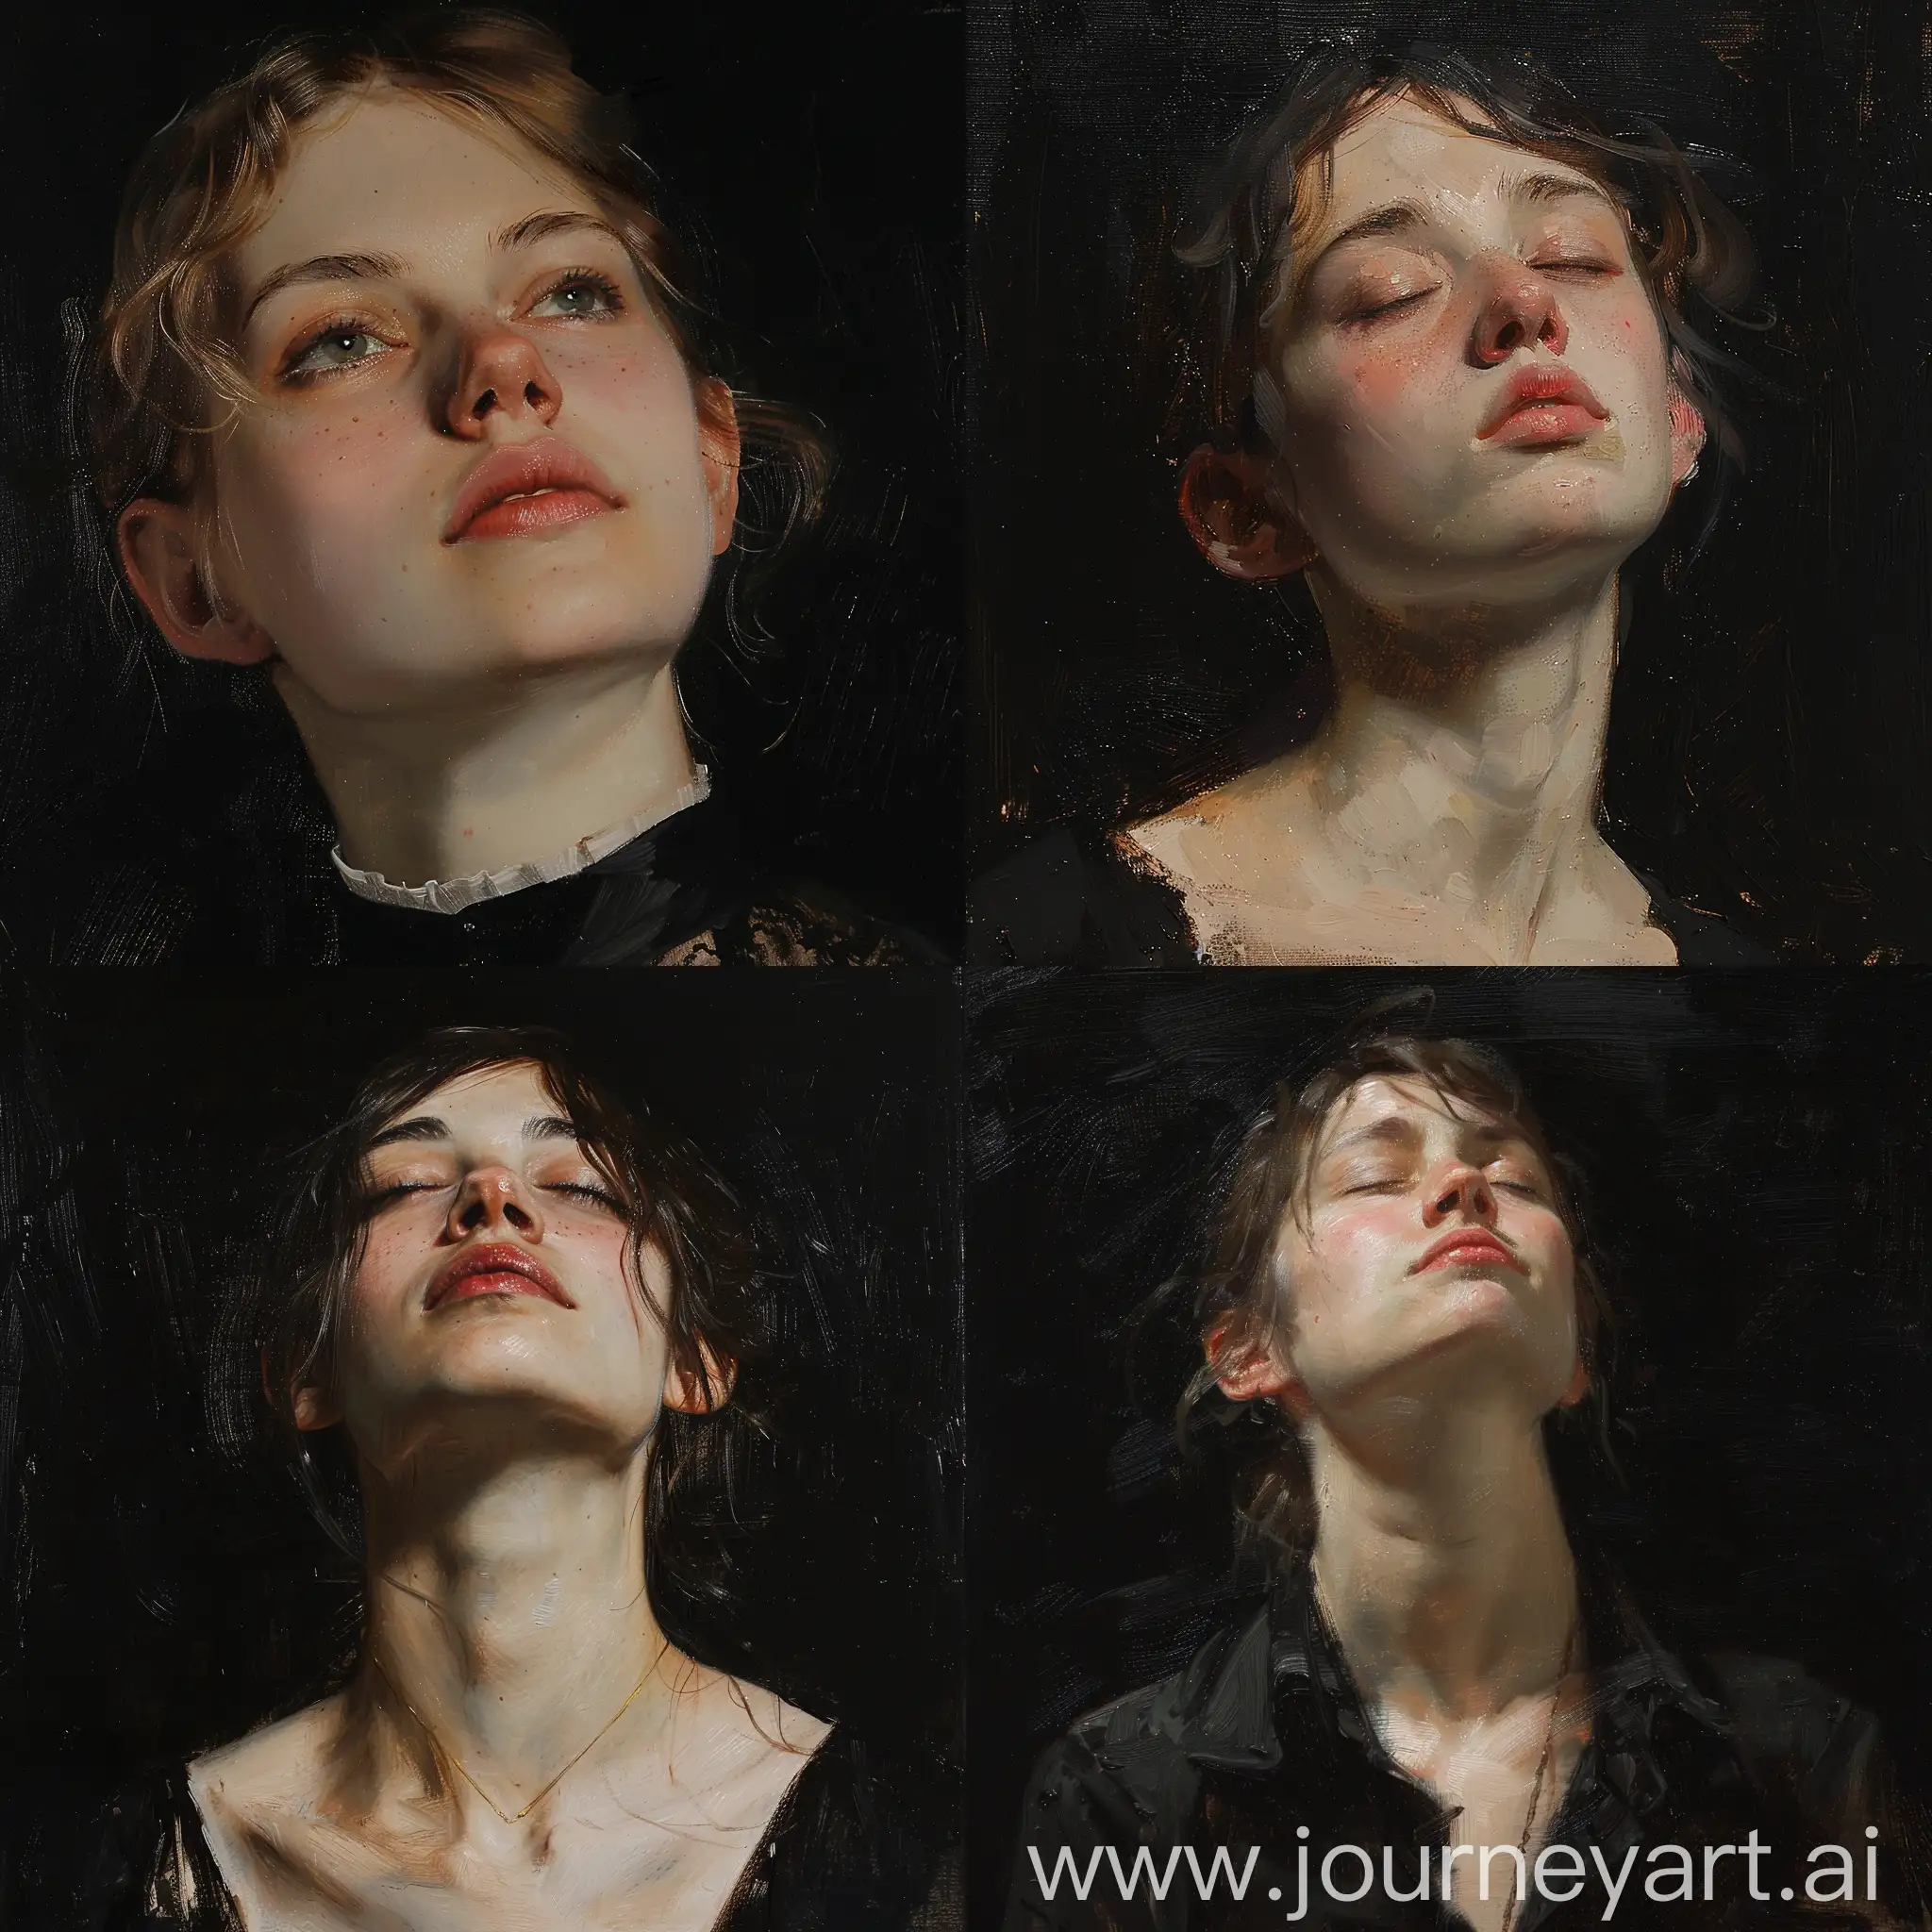 Modern emotional Oil sketch of a young gorgeous woman, wlop John singer Sargent, jeremy lipkin and rob rey, range murata jeremy lipking, John singer Sargent, black background, jeremy lipkin, lensculture portrait awards, casey baugh and james jean, detailed realism in painting, award-winning portrait, amazingly detailed oil painting, brushstrokes, Sean cheetham, details, well painted, good colors, strong shadows, black background 